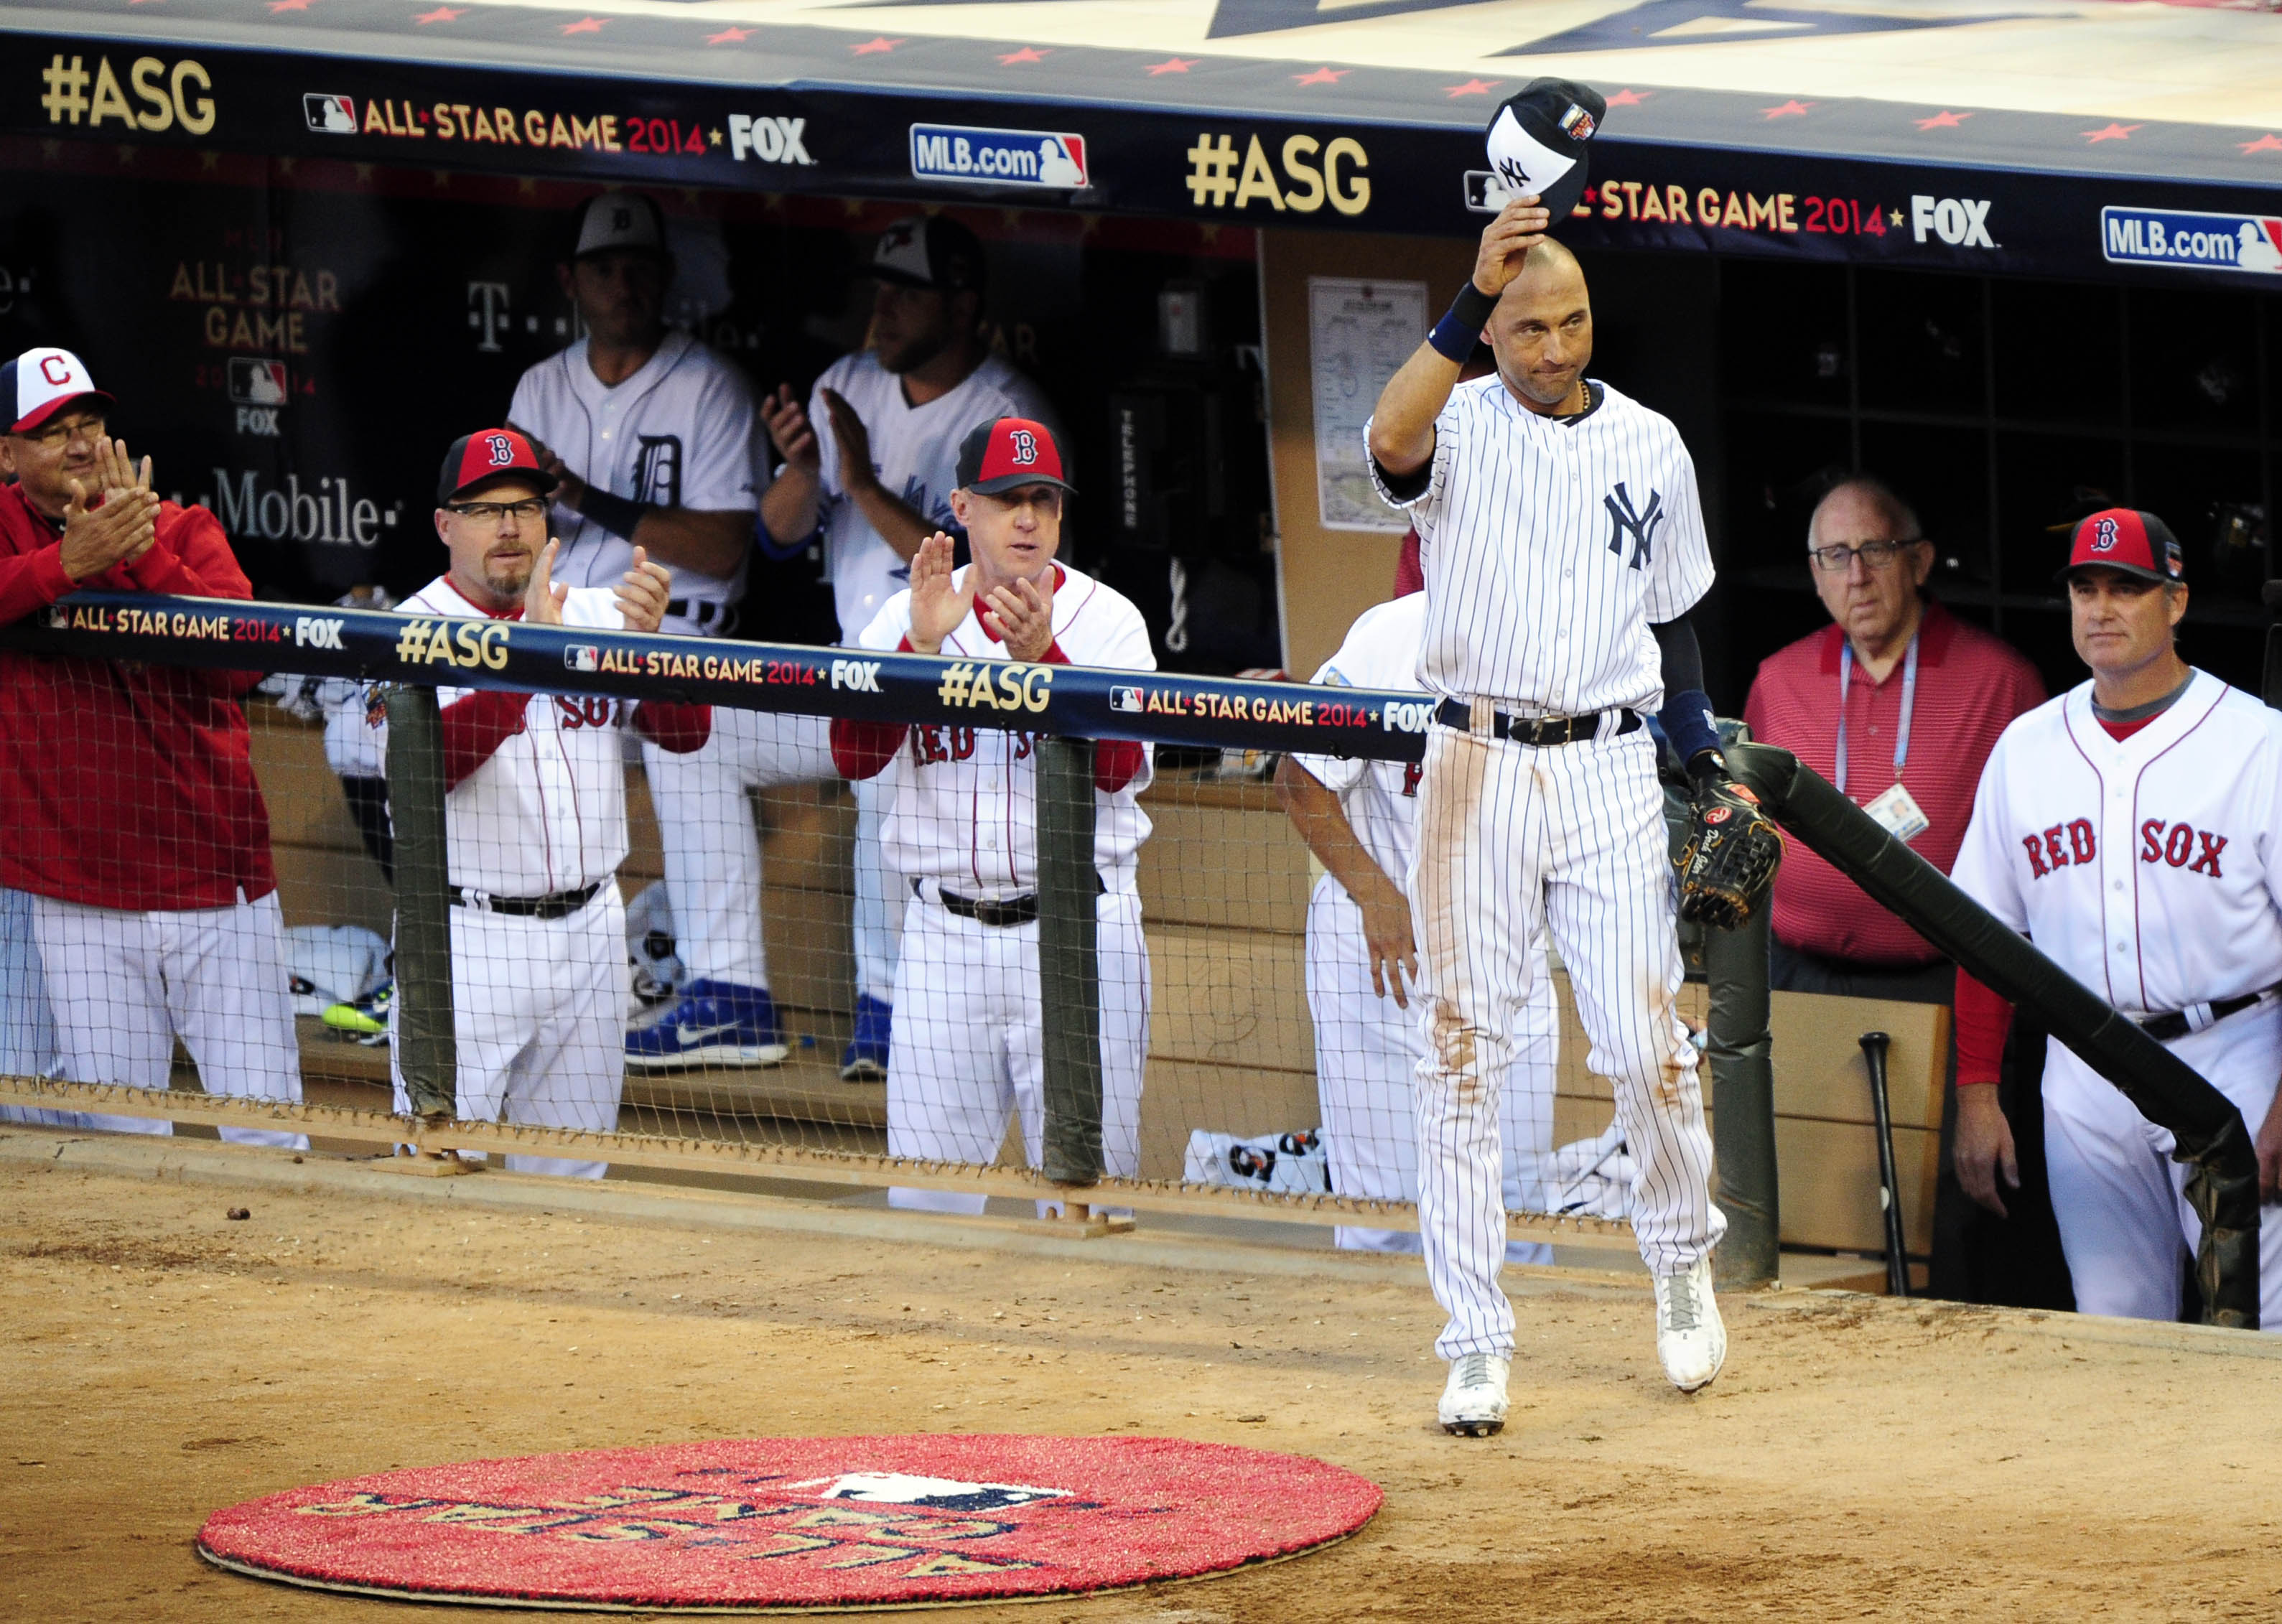 Derek Jeter takes a curtain call after being replaced in the fourth inning. (Jeff Curry, USA TODAY Sports) 